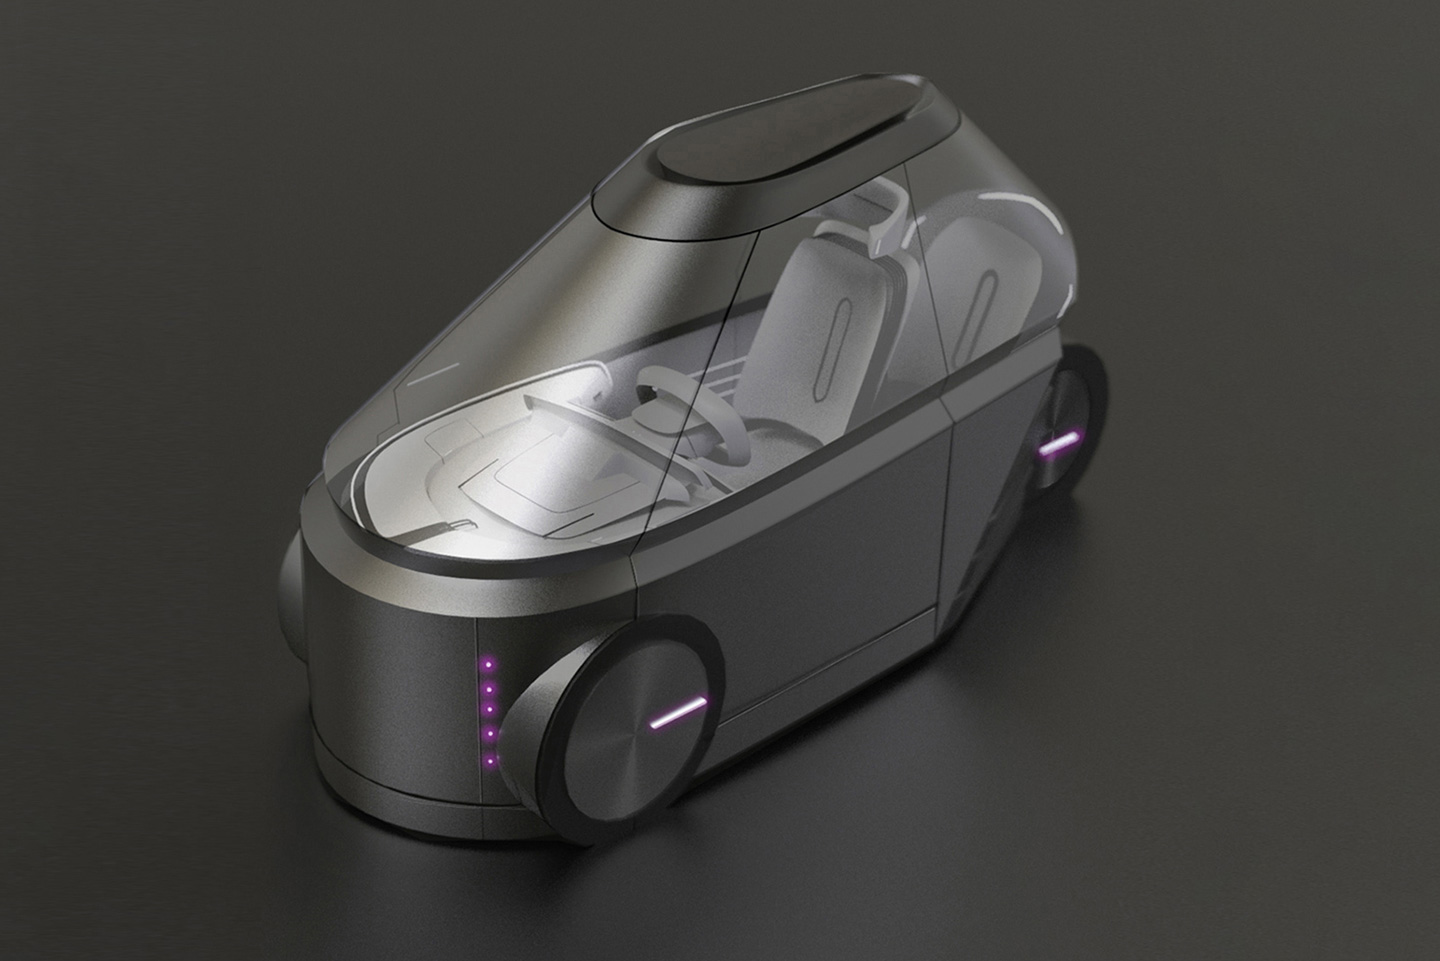 #This futuristic two-seater city vehicle is a cross between a car and motorcycle